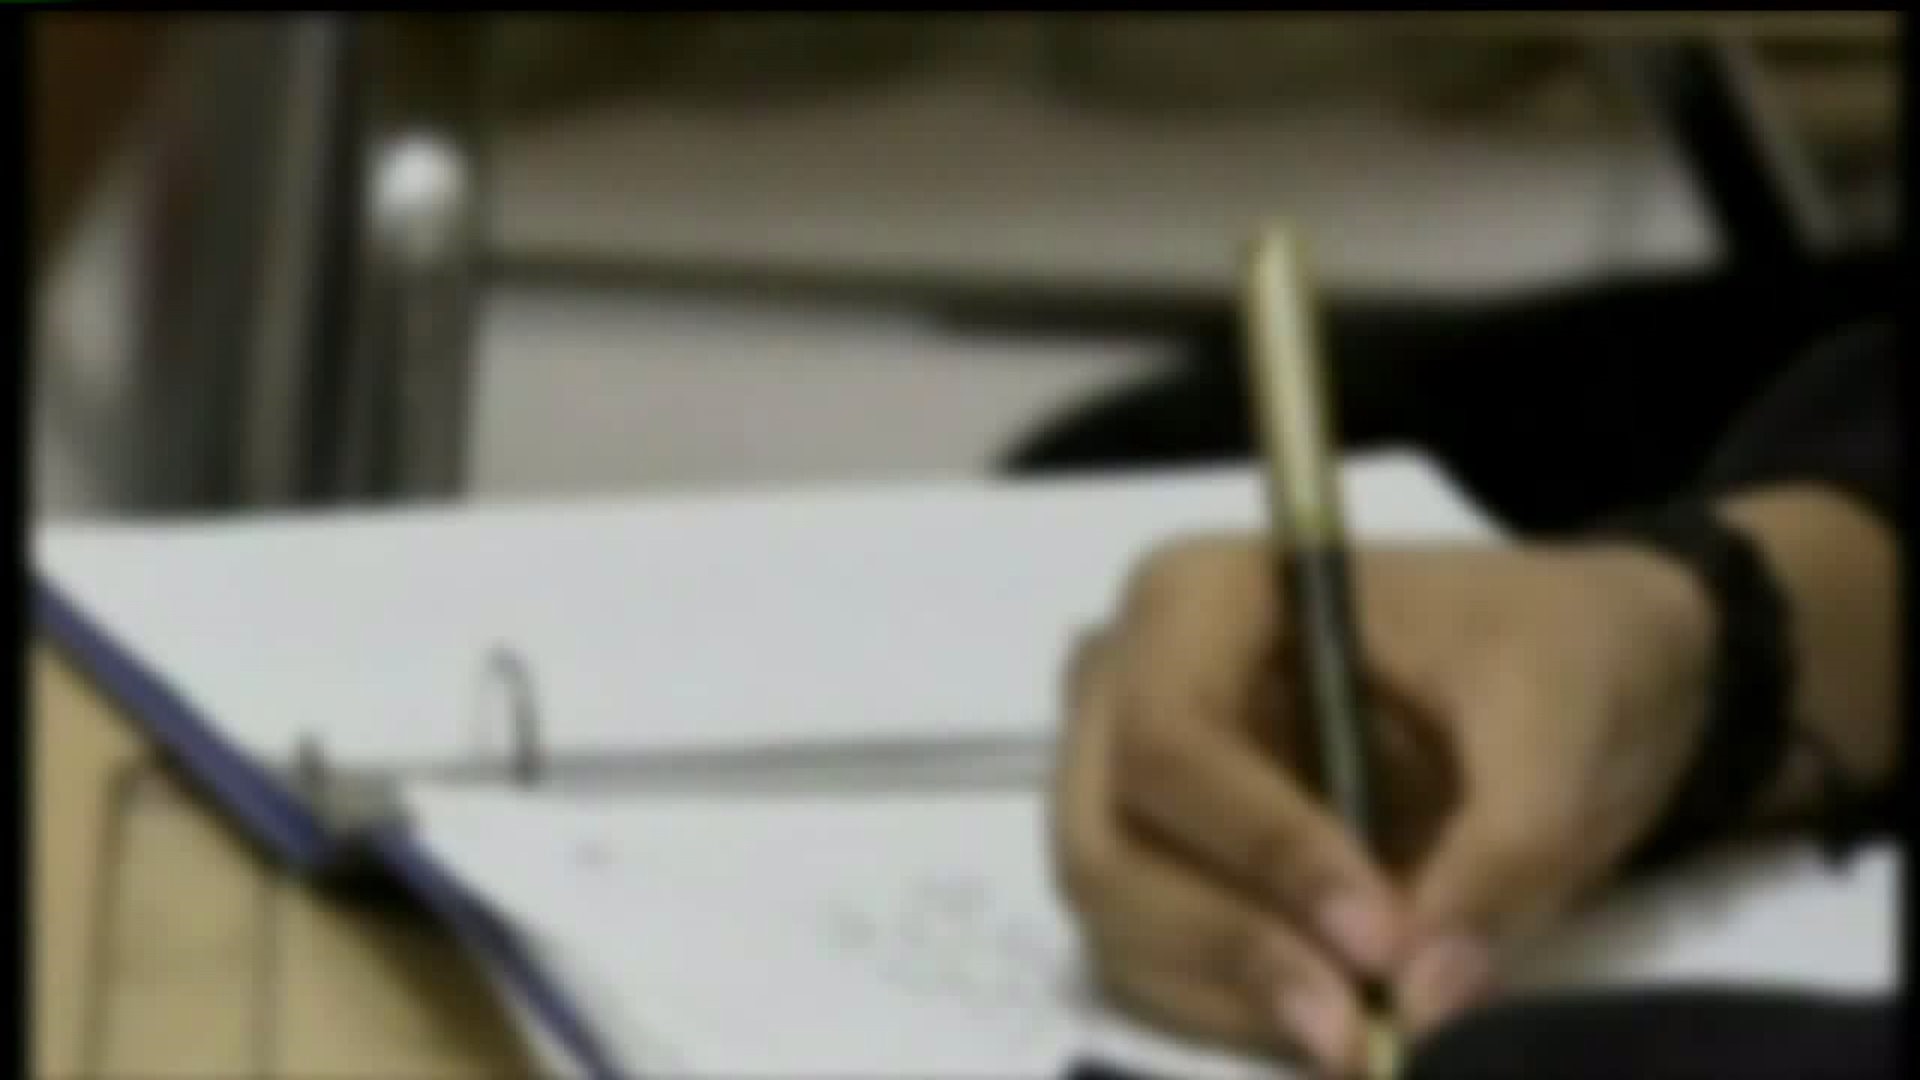 Parents want teacher accused of making racial slurs fired